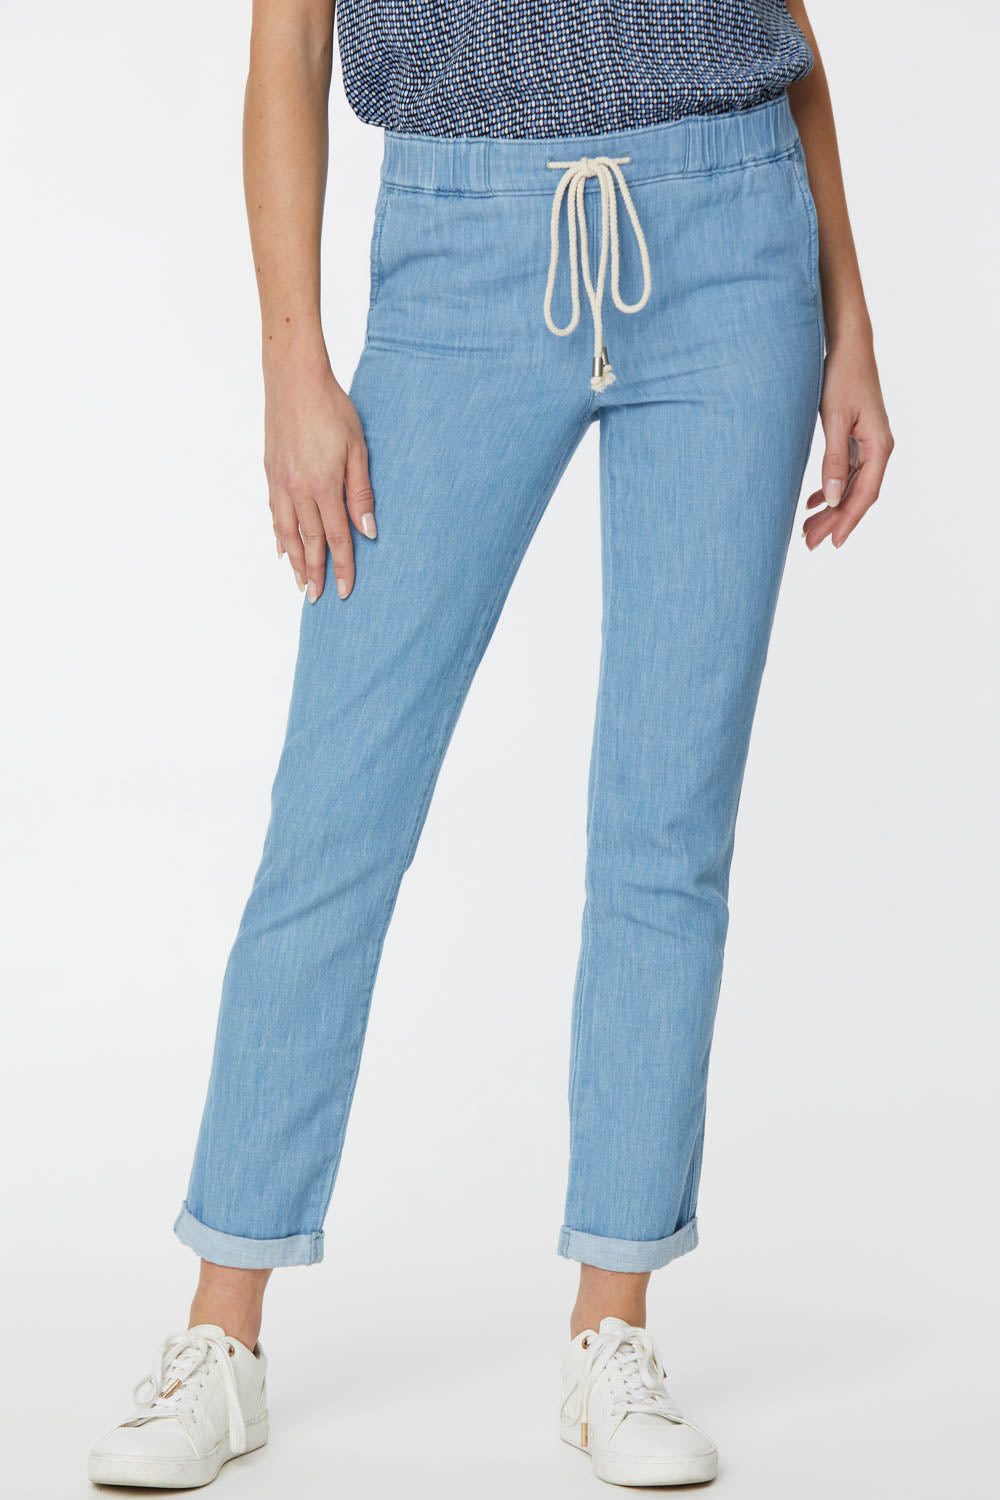 Slim Jogger Ankle Pants With Roll Cuffs - Light Stone Blue